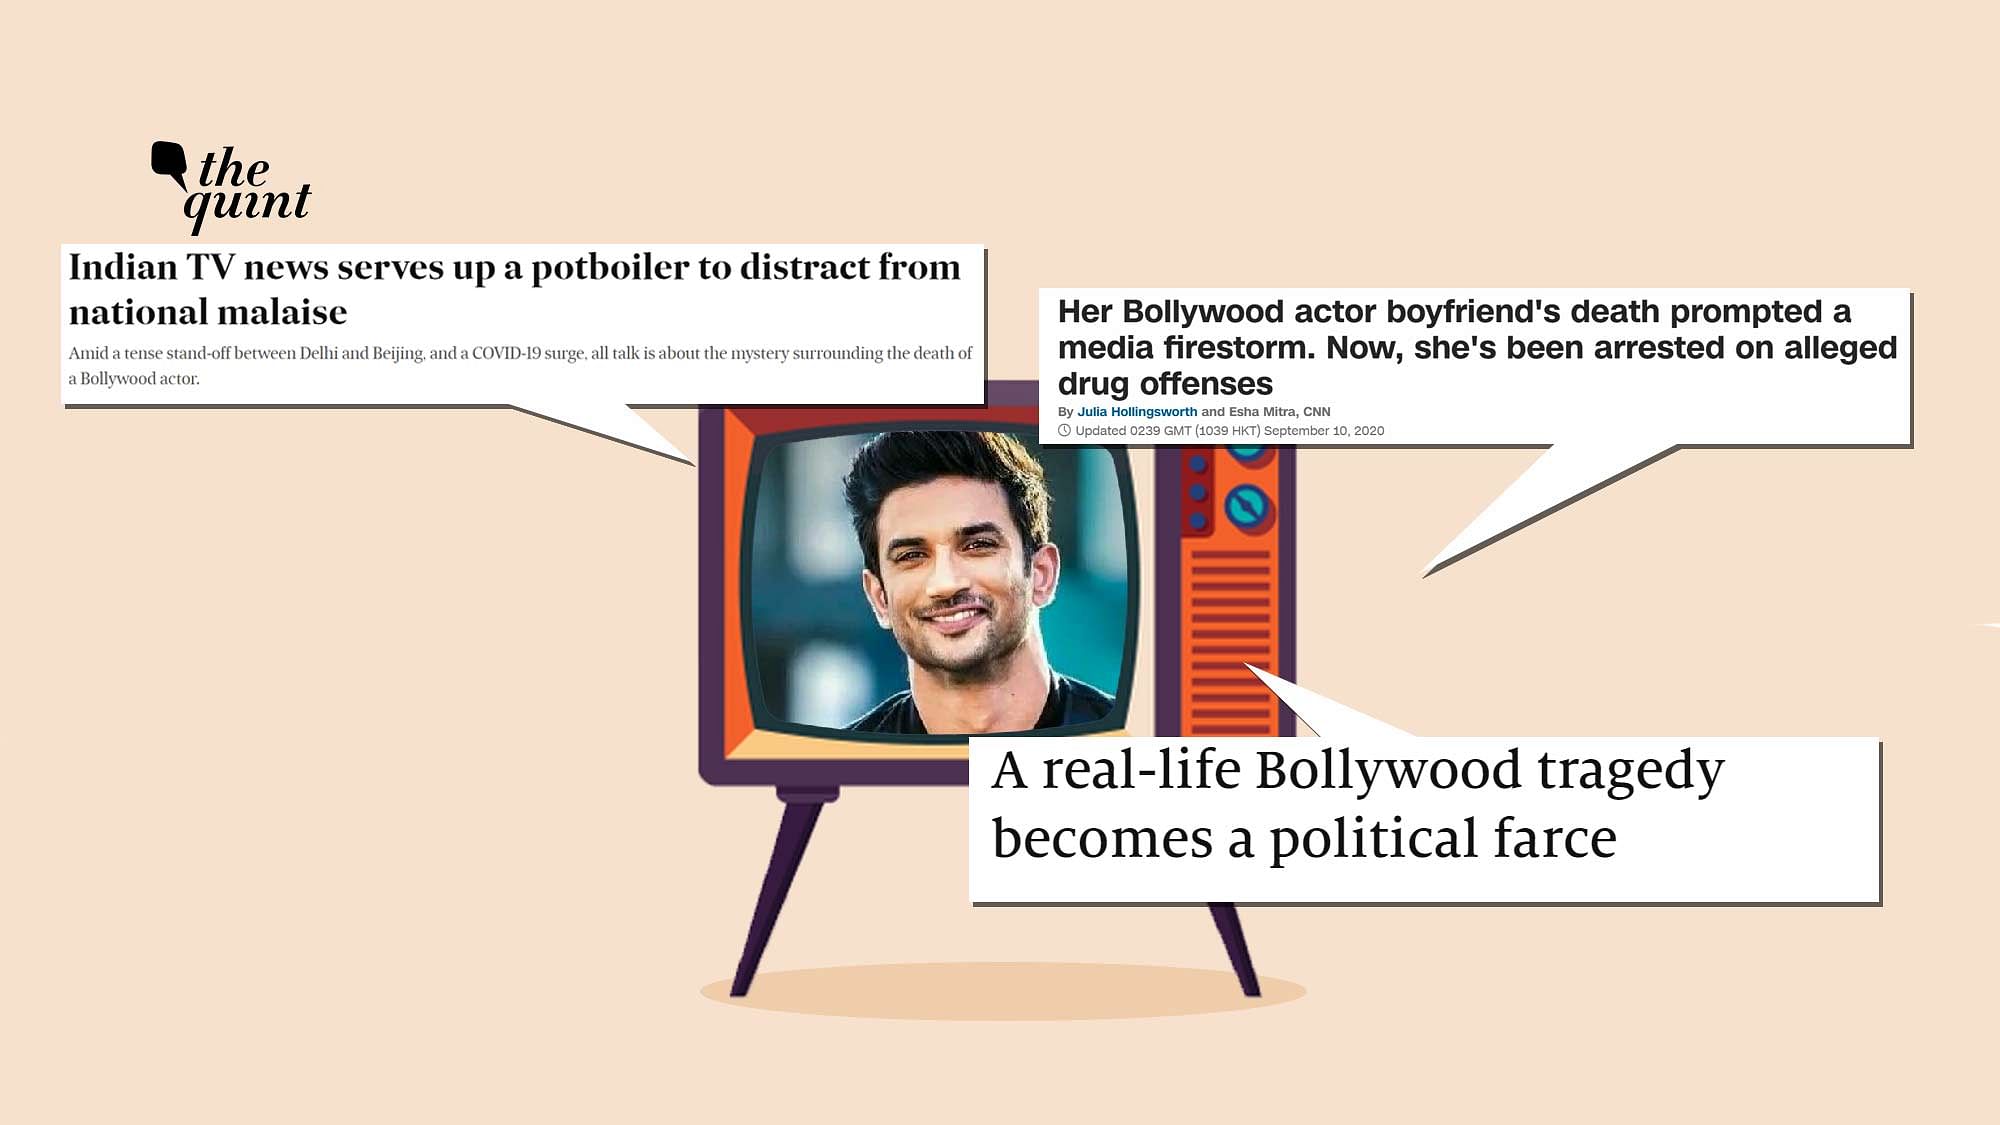 The international media too took note of actor Sushant Singh Rajput’s death and reported on it in June.